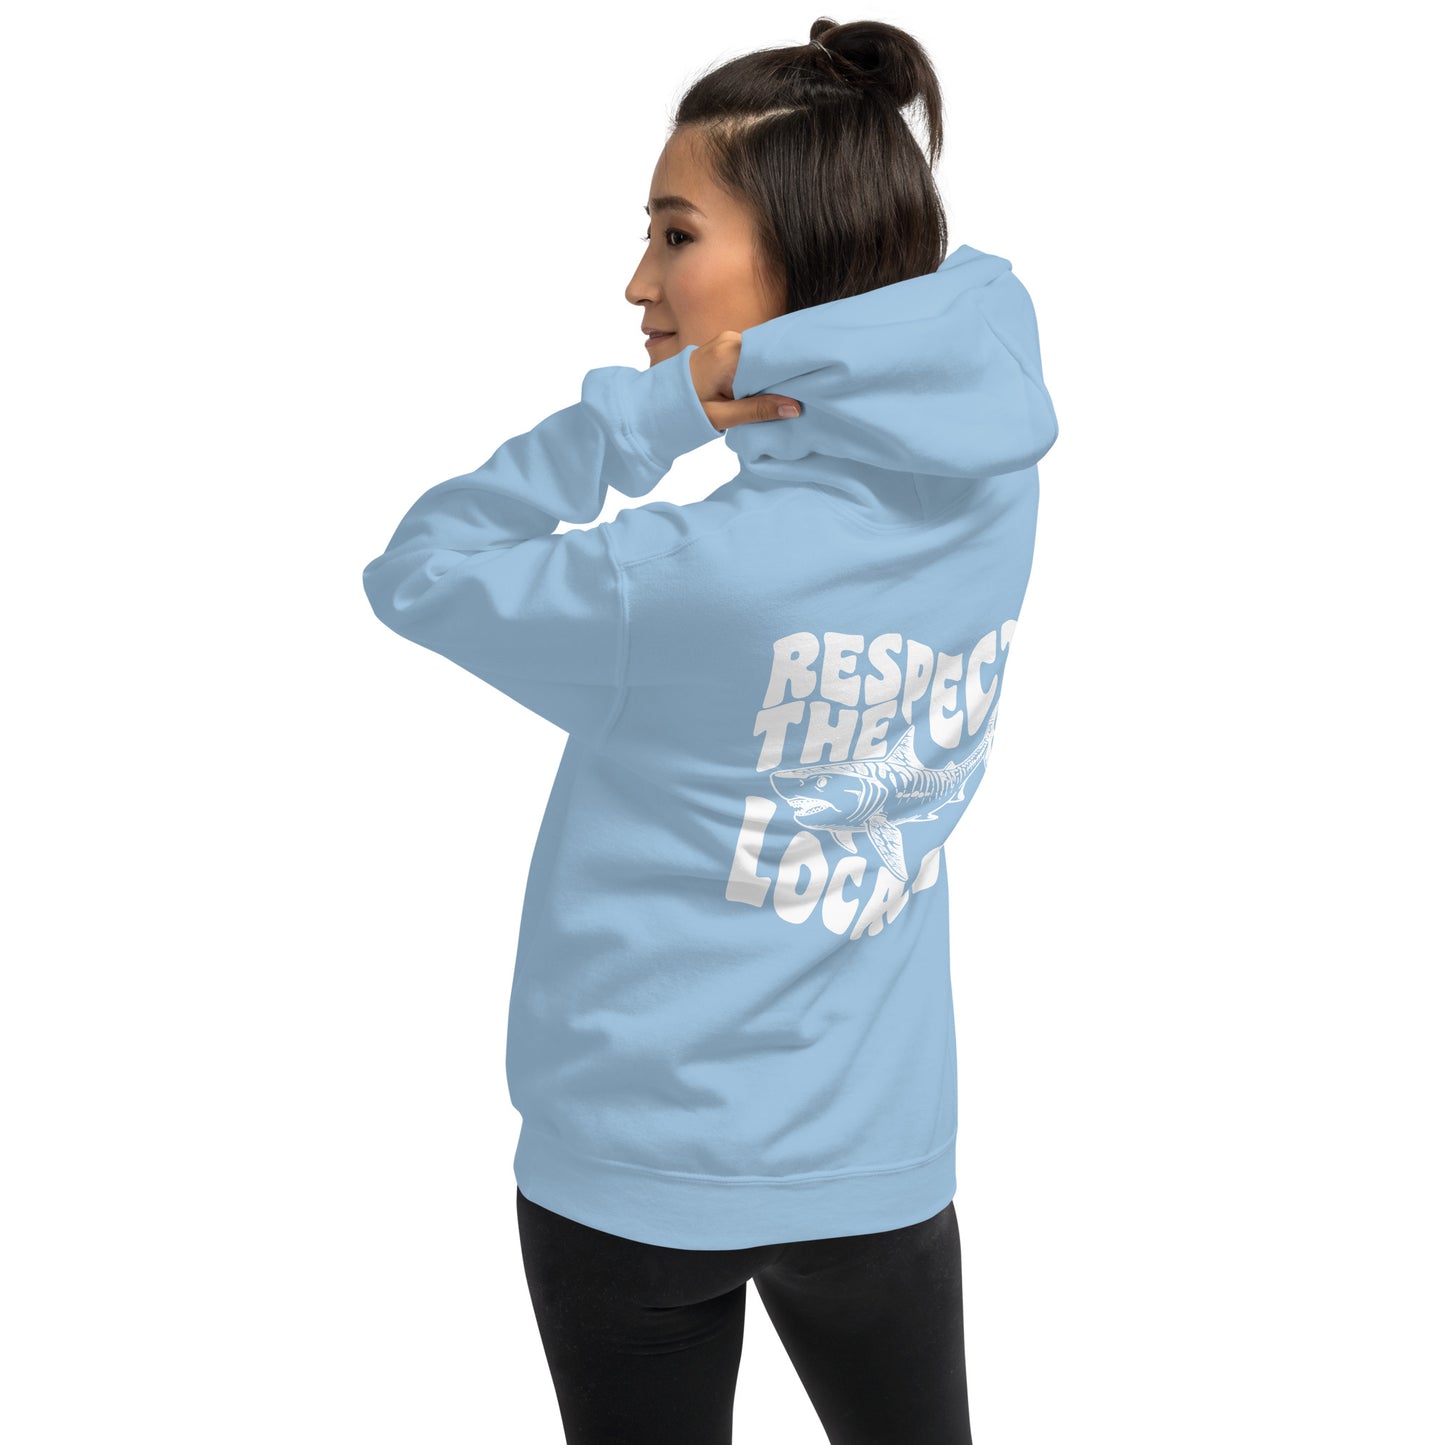 Respect the Locals Beach Hoodie, perfect for oversized look